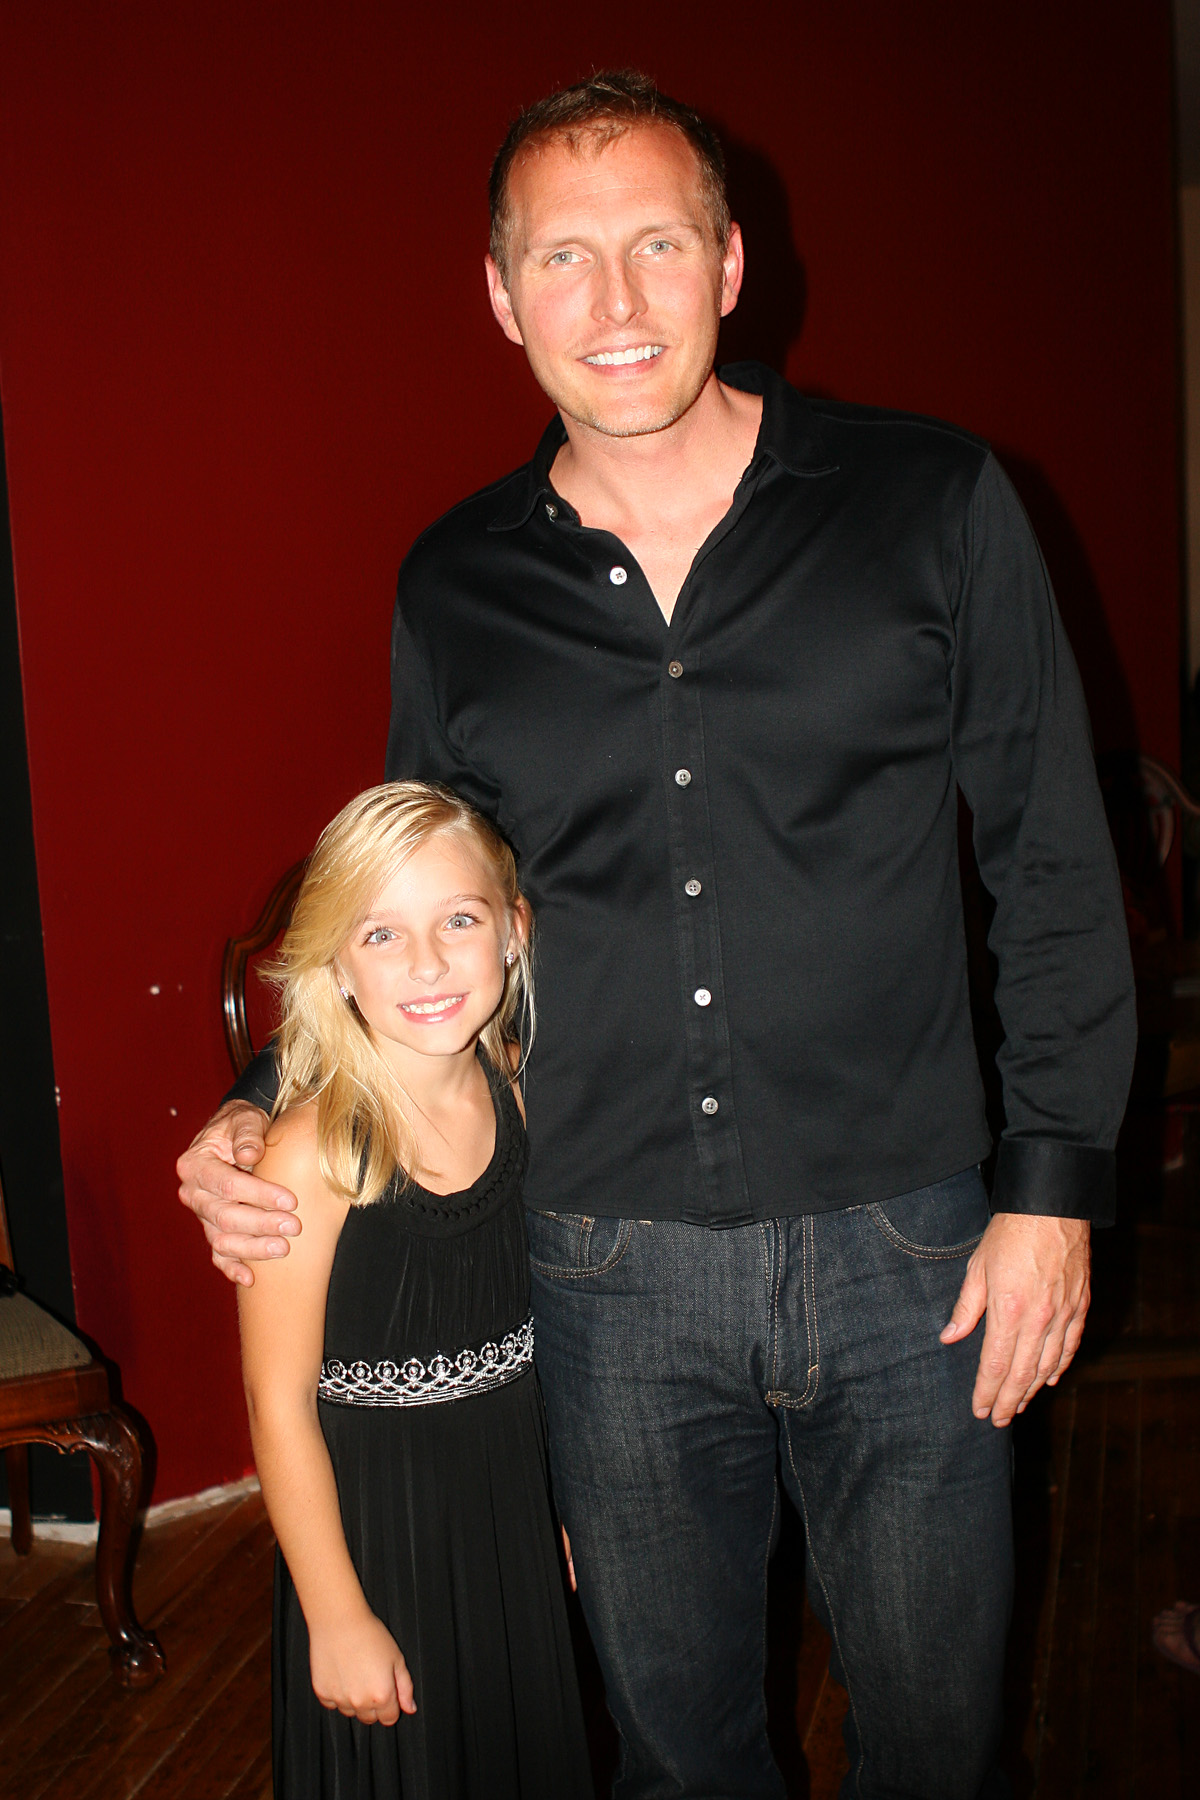 Julianna with Barret Walz at the screening of A Wish Your Heart Makes